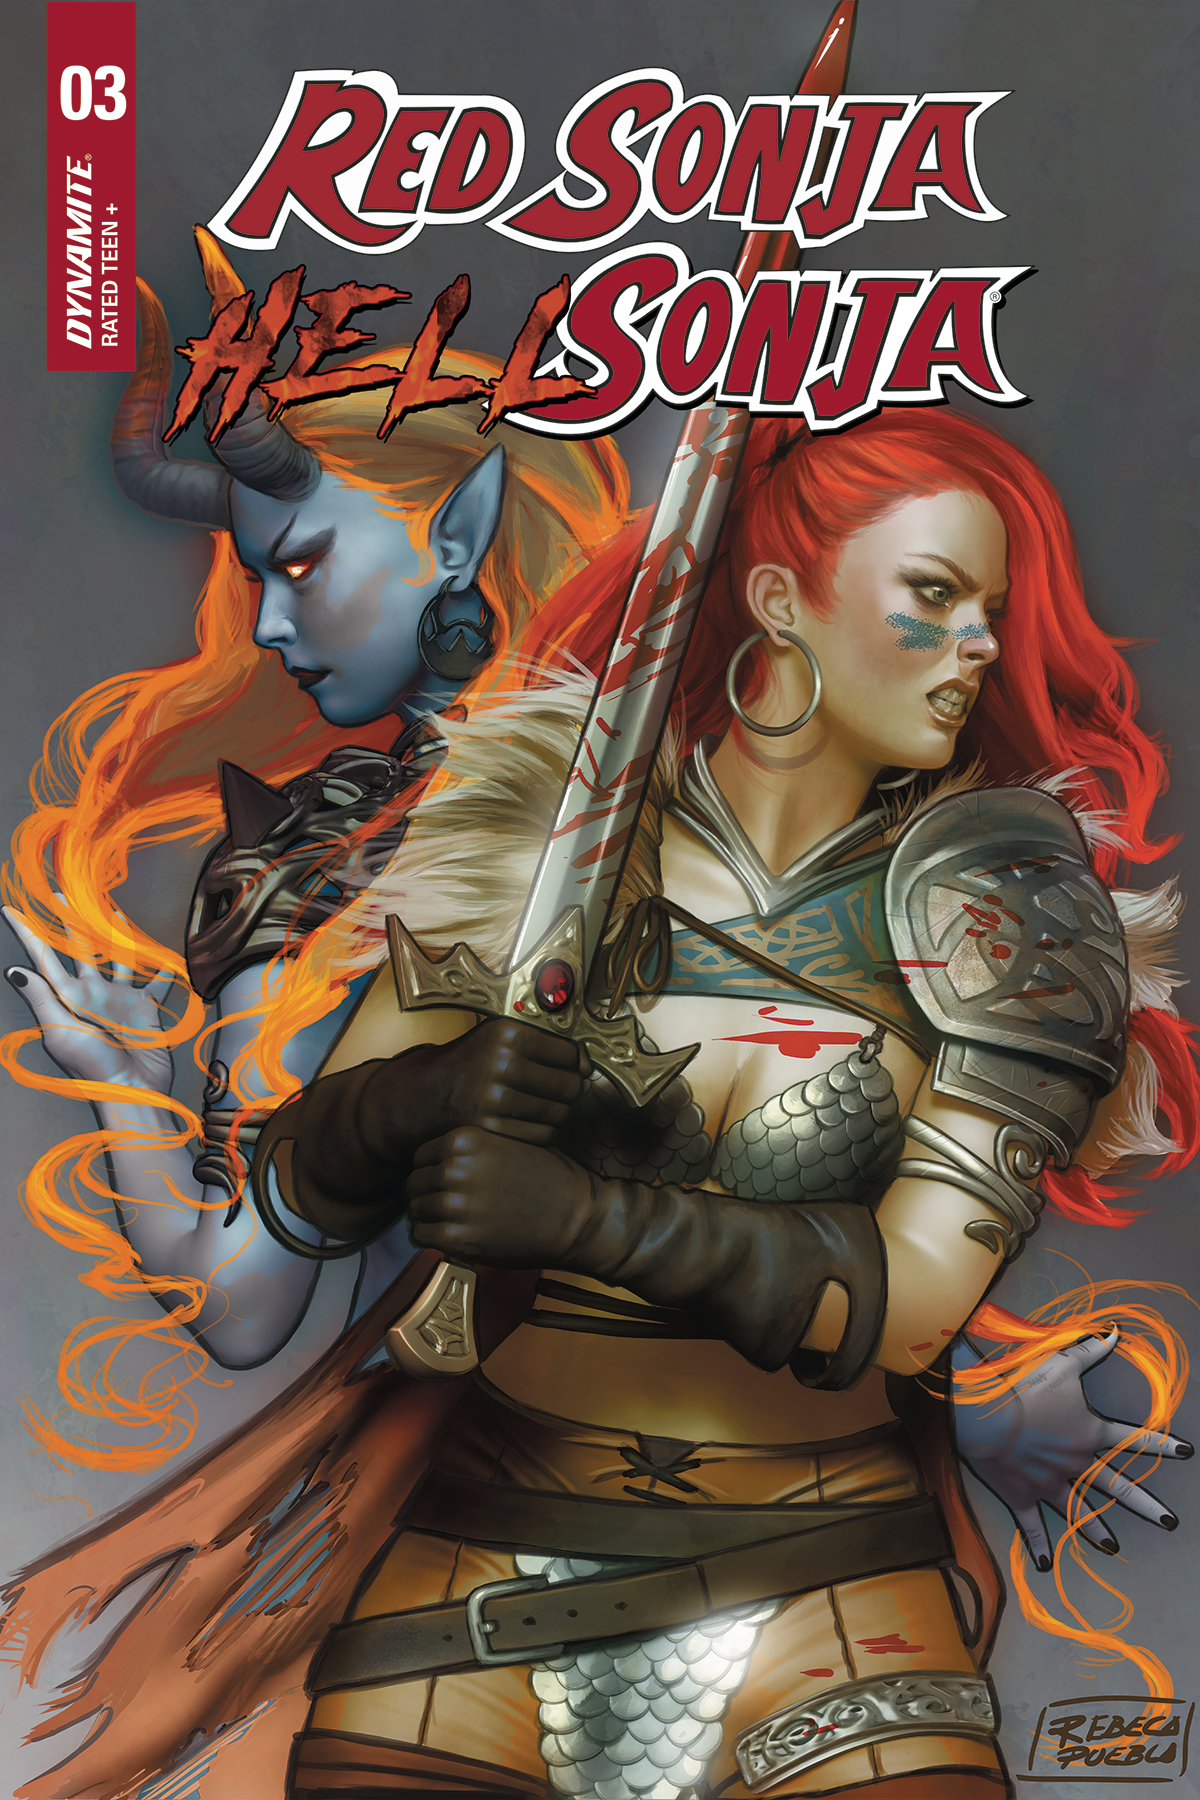 Red Sonja Hell Sonja #3 Cover D Puebla